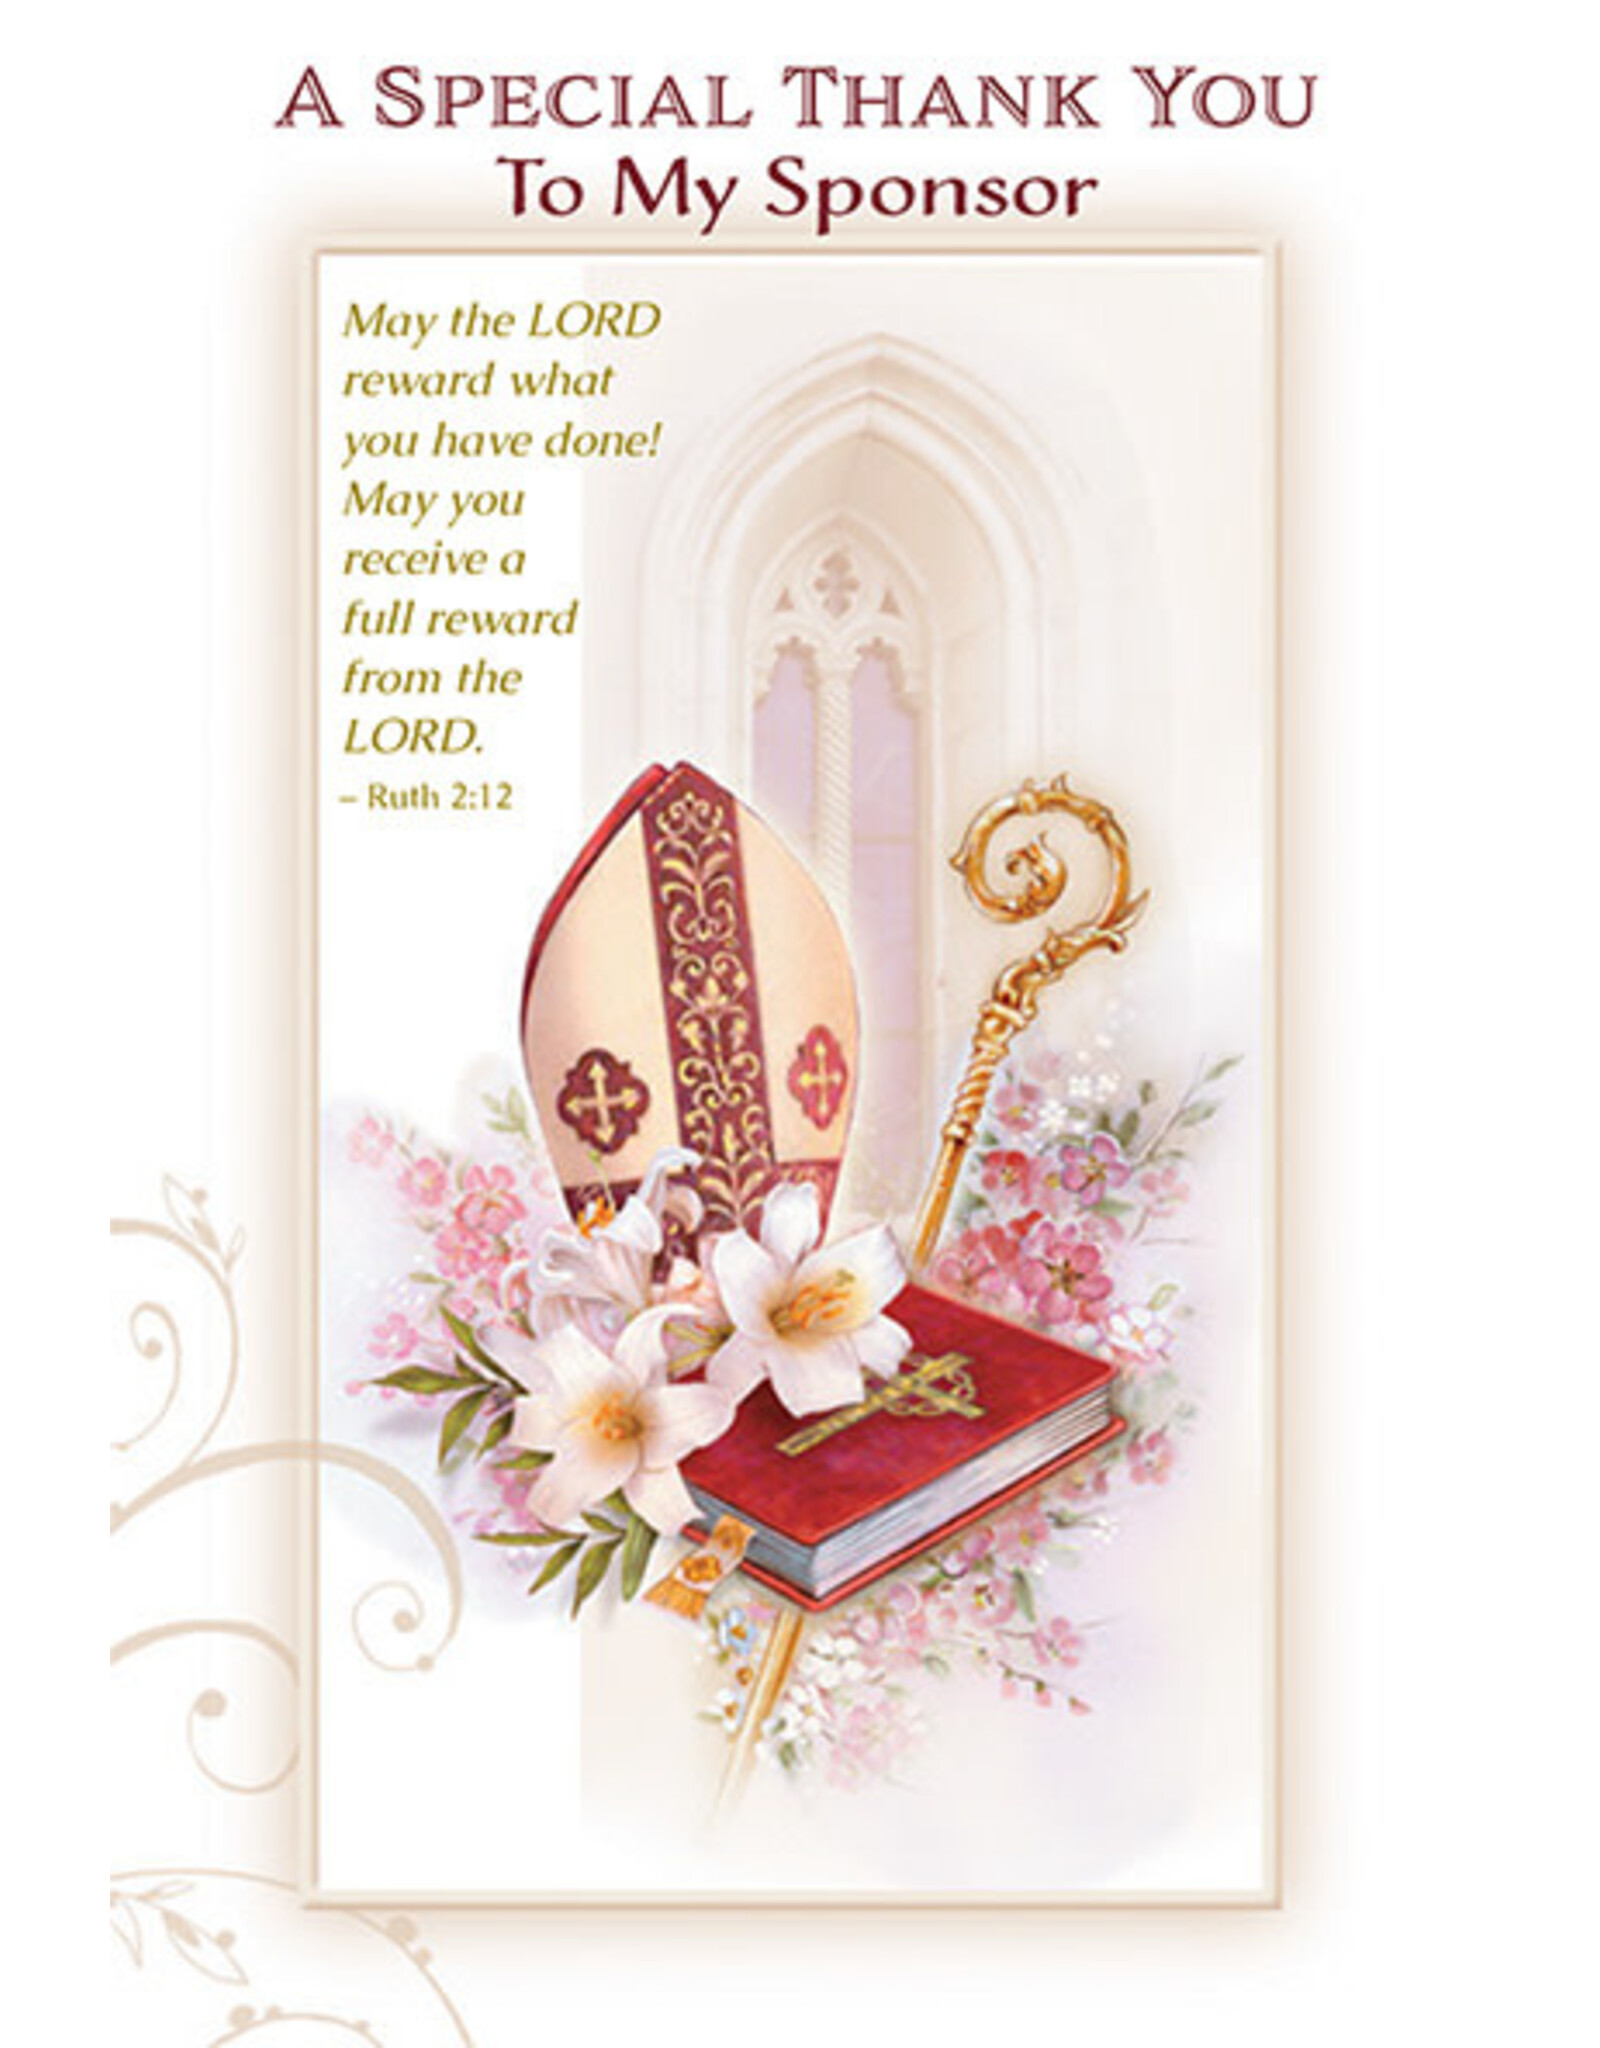 Greetings of Faith Card - Confirmation (Thank You Sponsor), Special Thank You